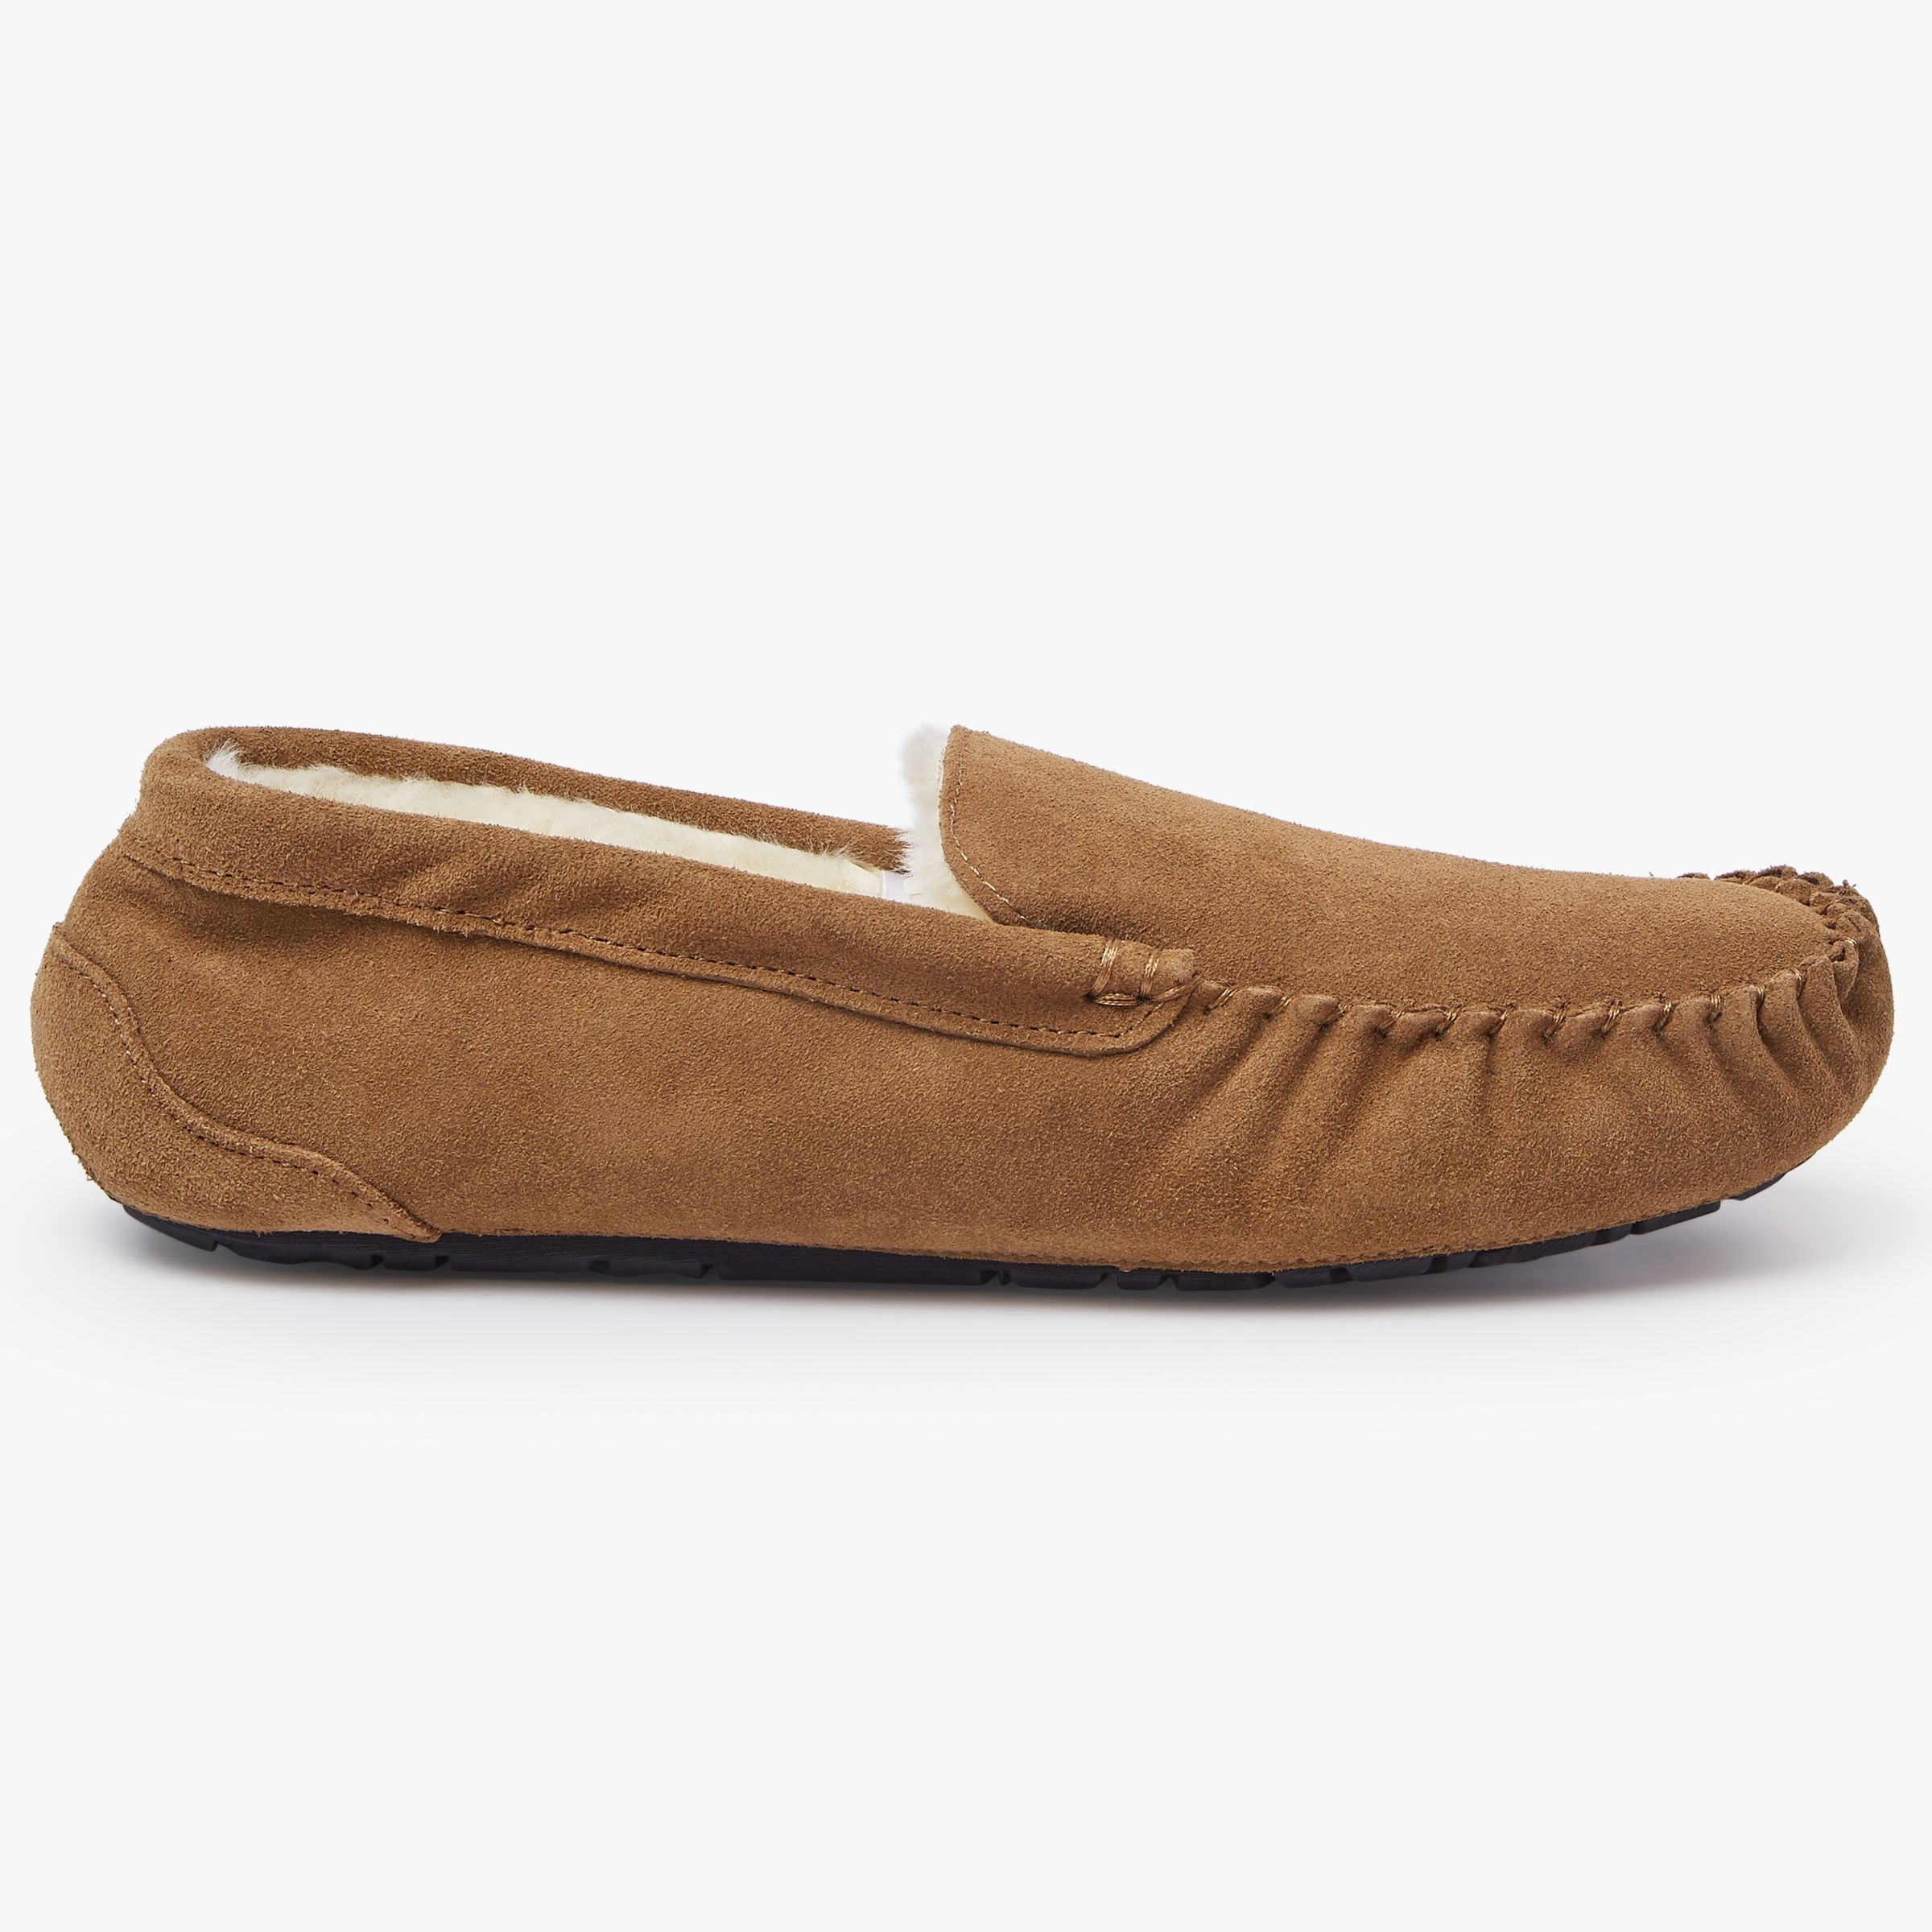 John Lewis & Partners Moccasin Faux Fur Lined Slippers, Chestnut, 11